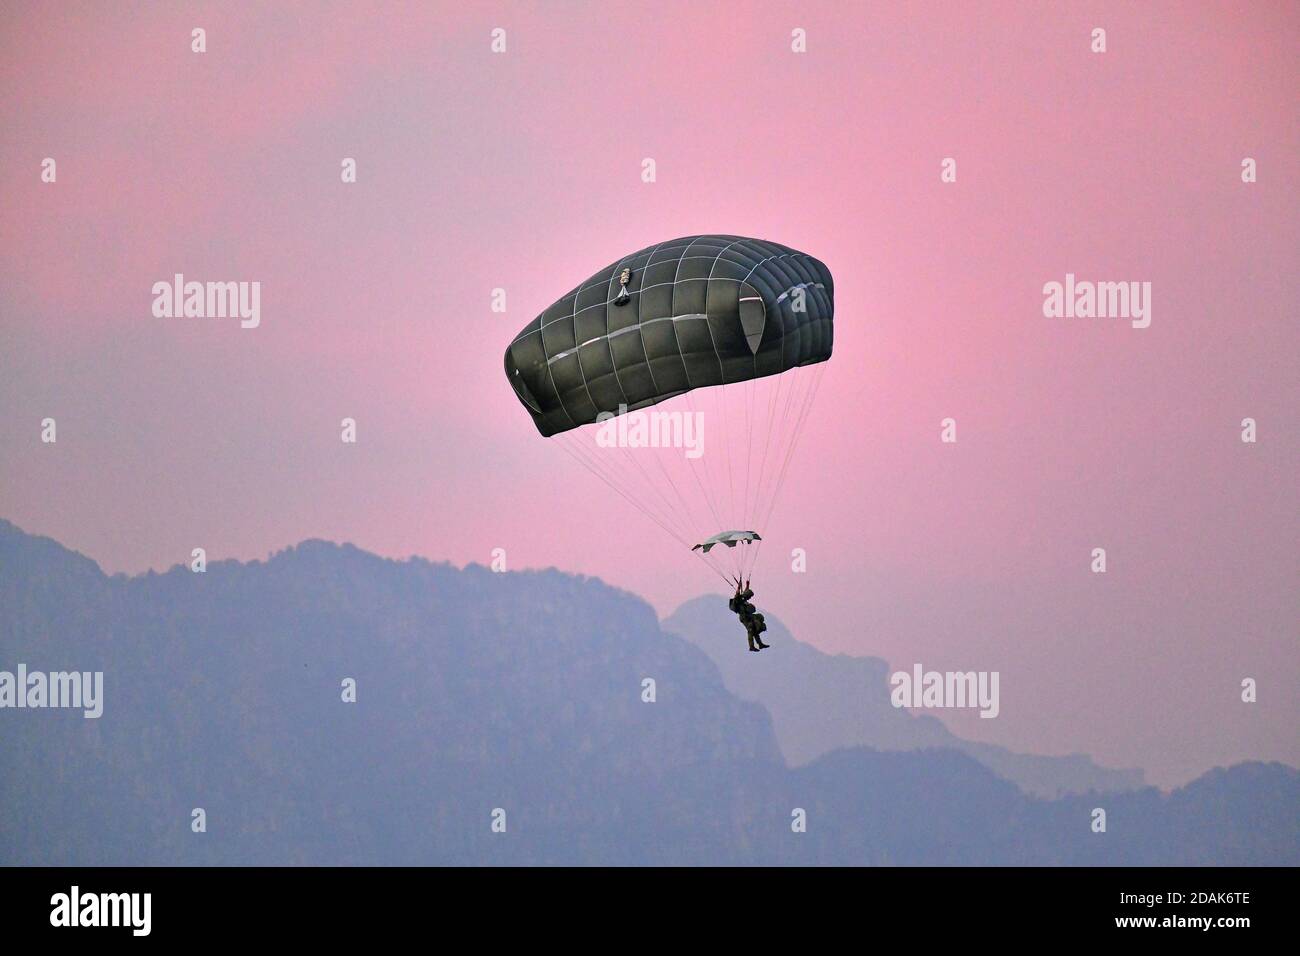 Pordenone, Italy. 12th Nov, 2020. U.S. Army Paratroopers with the 173rd Airborne Brigade, and Paratroopers with the Italian Army 4th Alpini Regiment, conduct airborne operation at dawn November 12, 2020 in Pordenone, Italy. Credit: Davide Dalla Massara/U.S. Army Photo/Alamy Live News Stock Photo